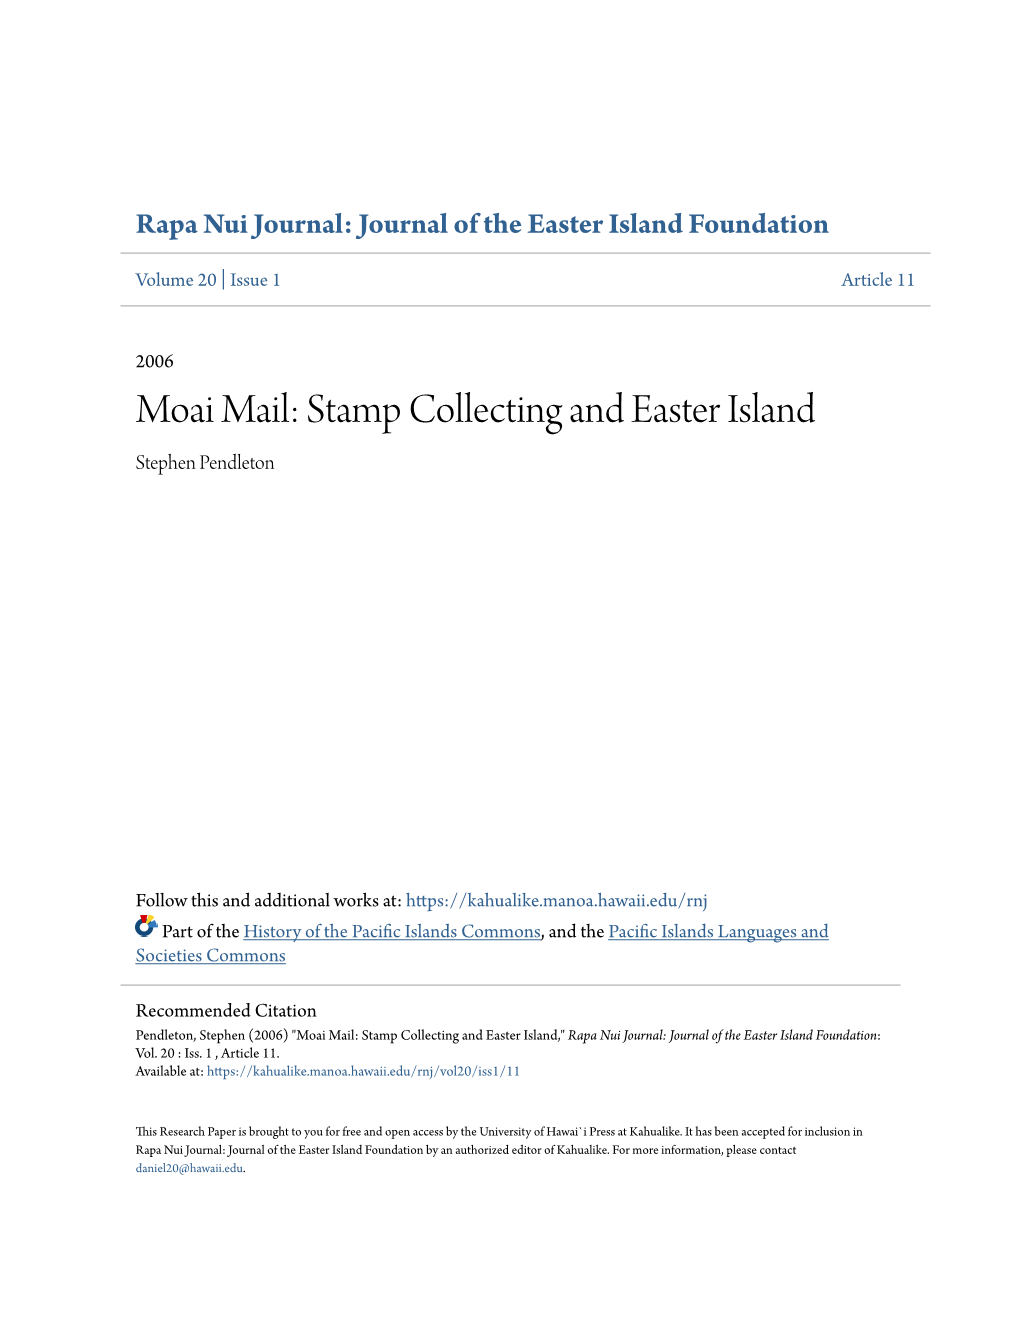 Stamp Collecting and Easter Island Stephen Pendleton